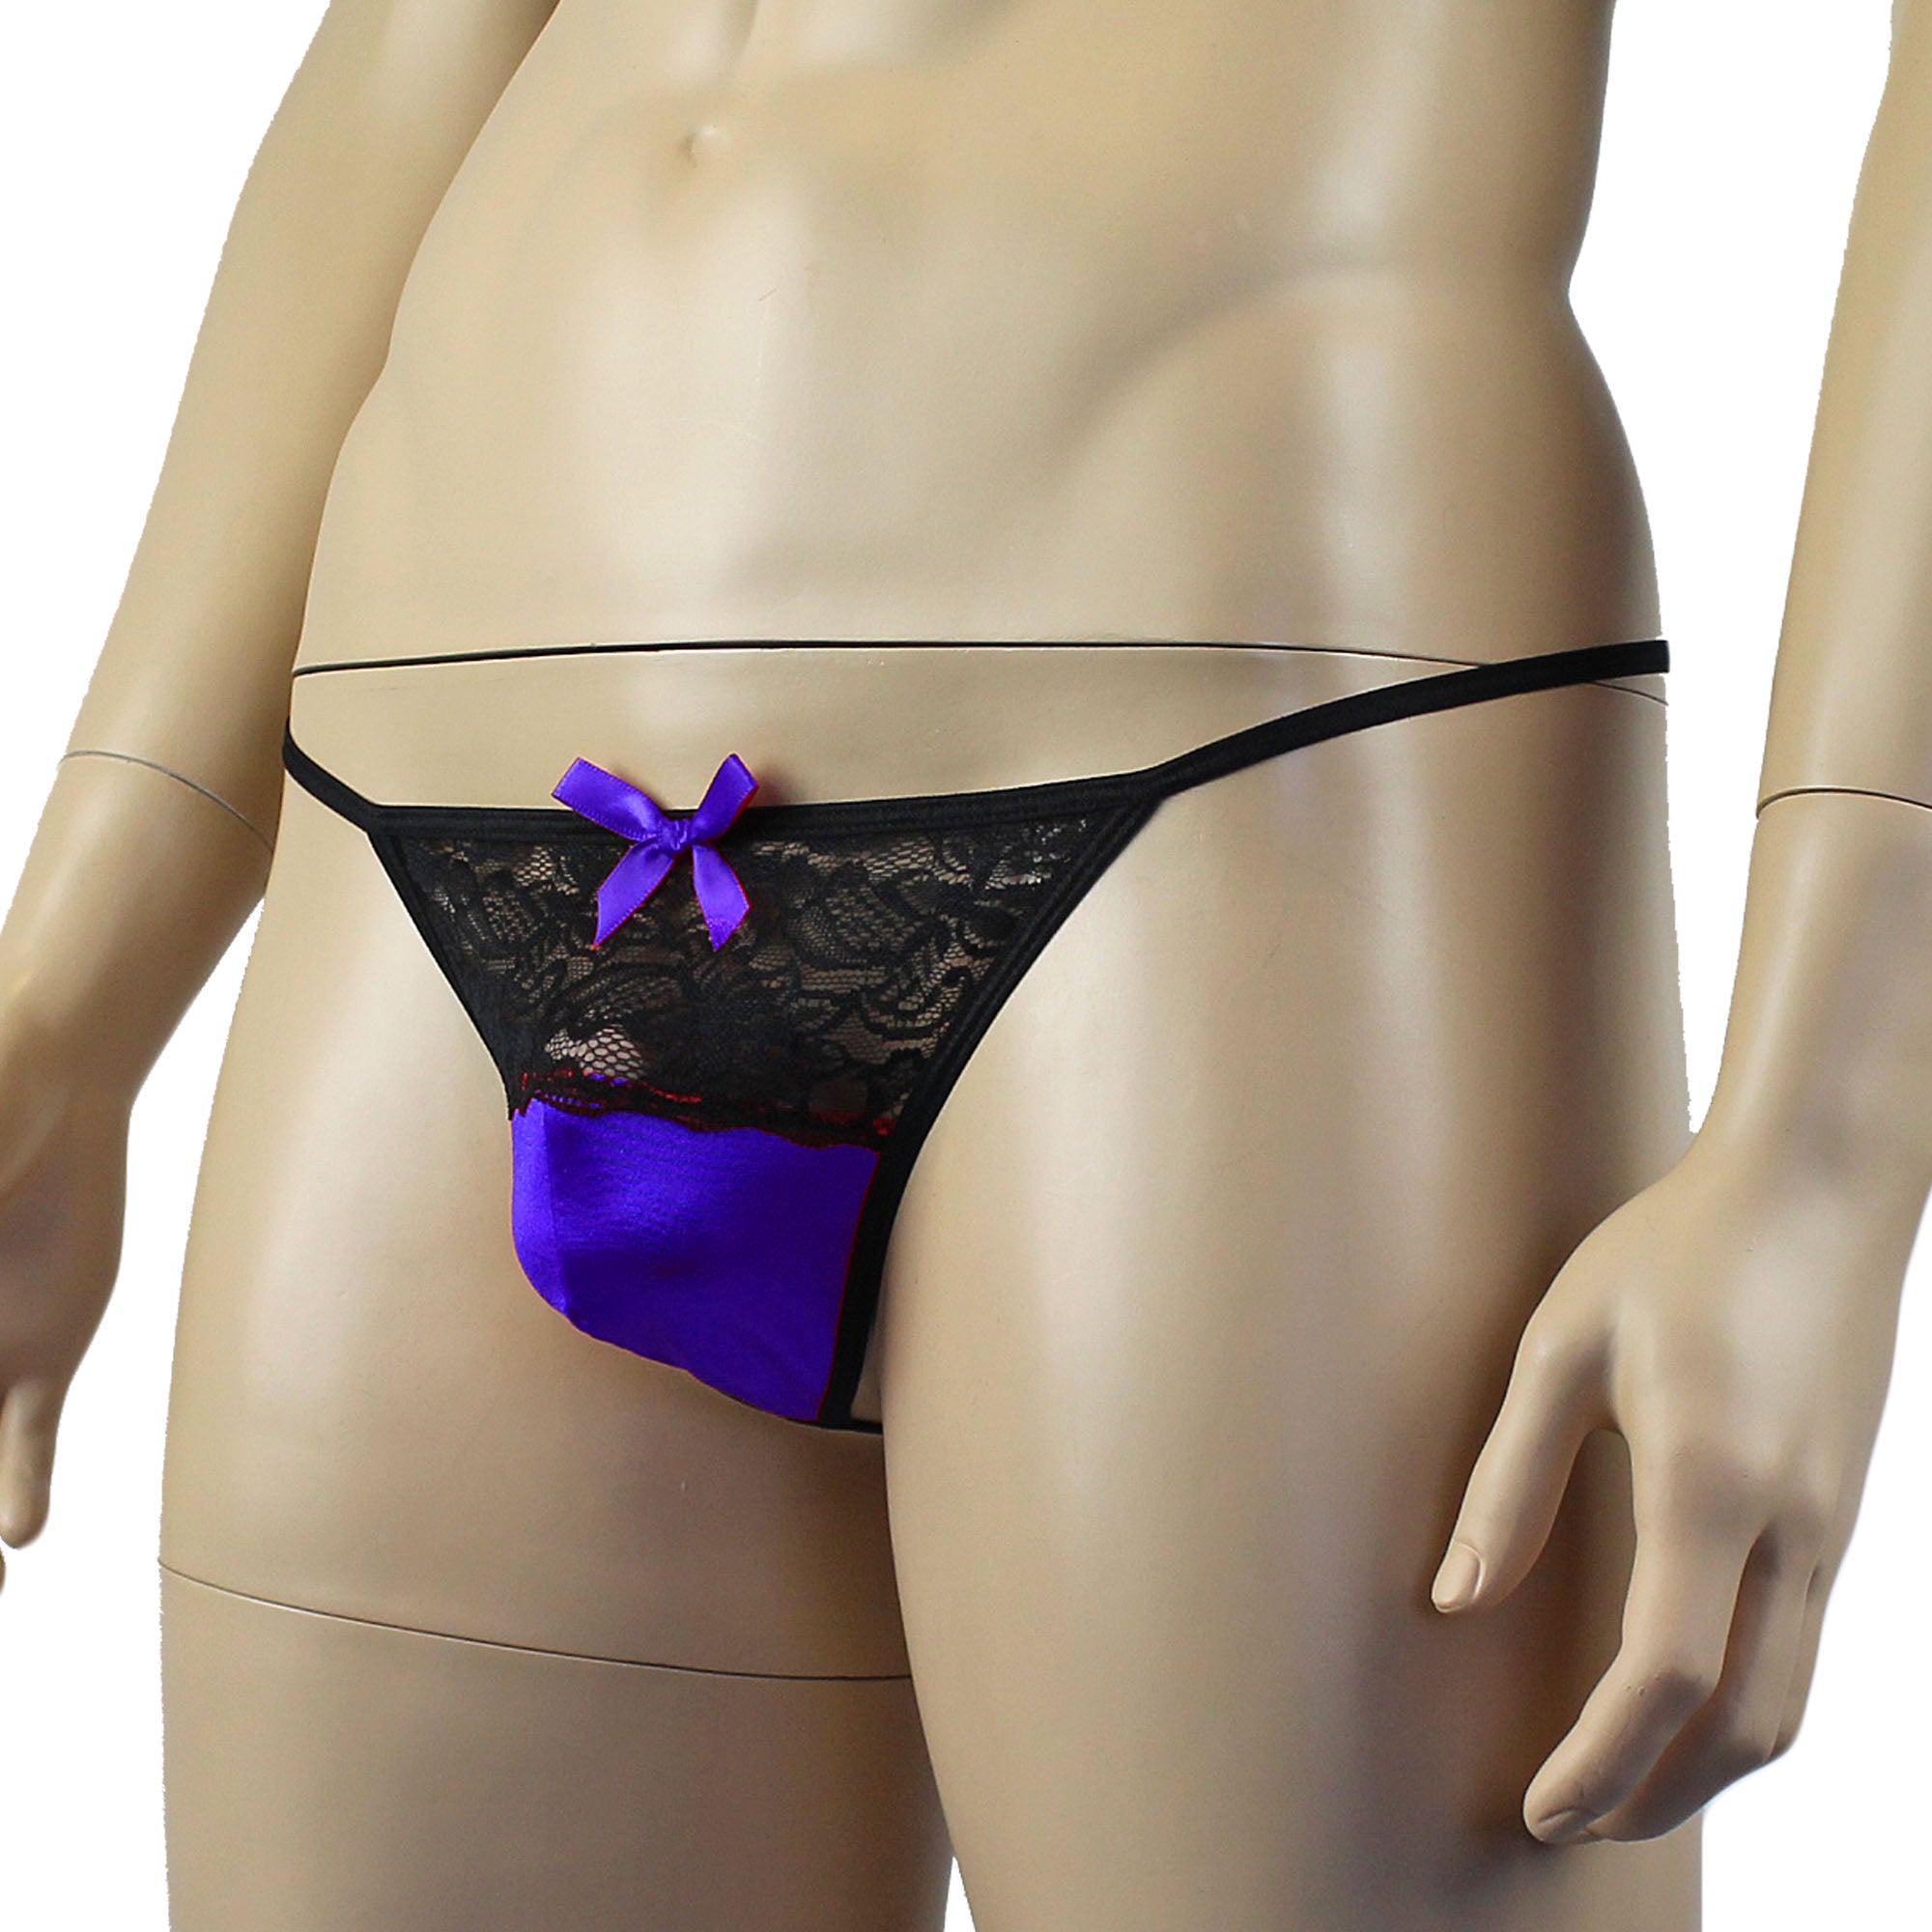 Mens Joanne Lacey G string with Bow Blue and Black Lace